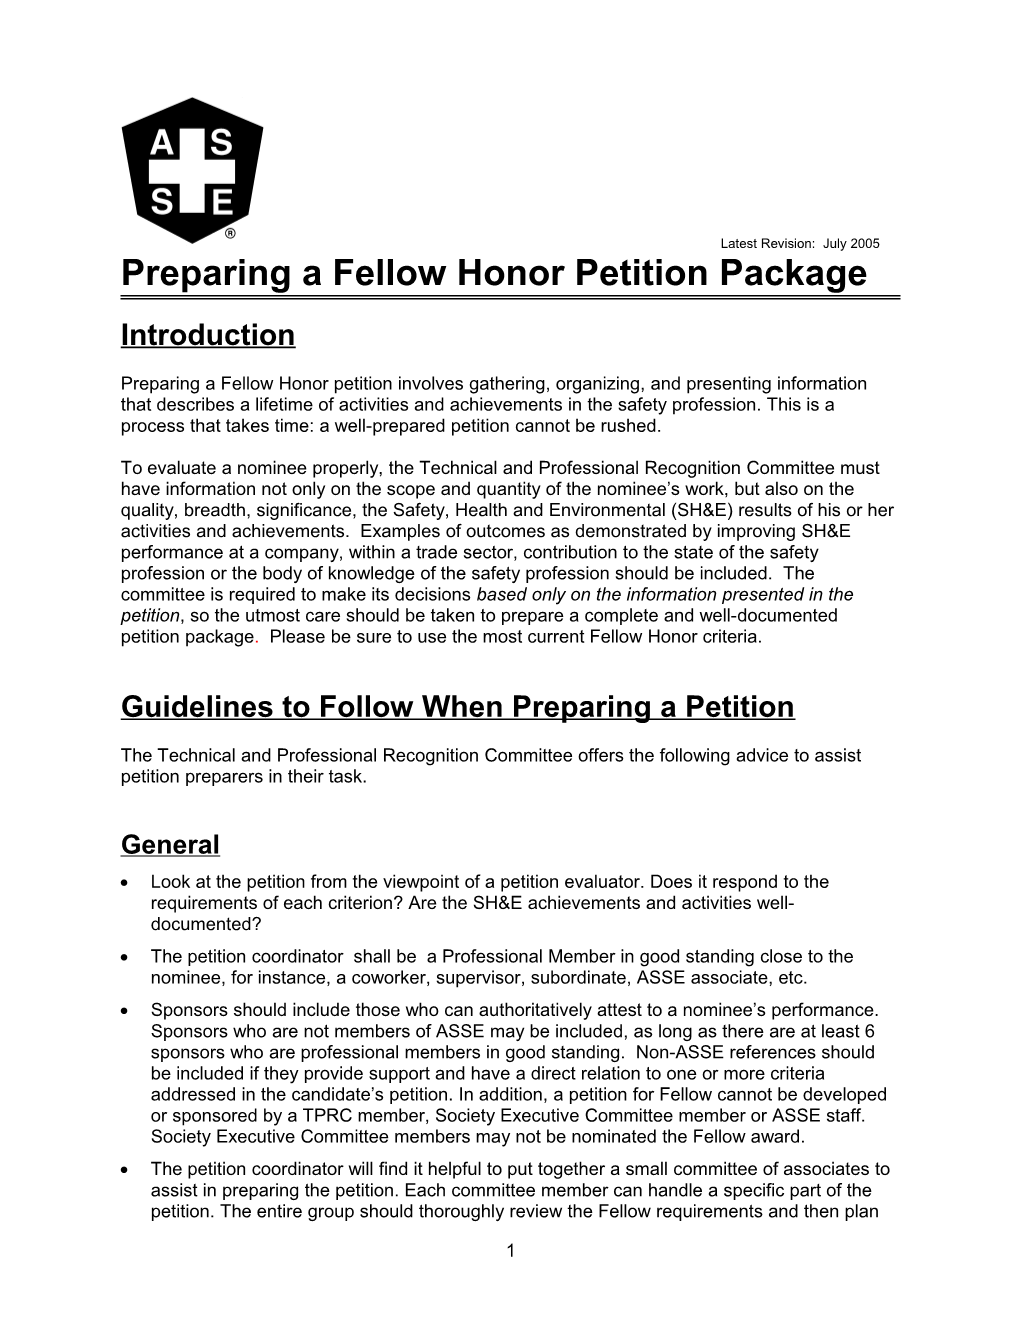 Fellow Honor Petition Pkg Completed Revisions July 2005